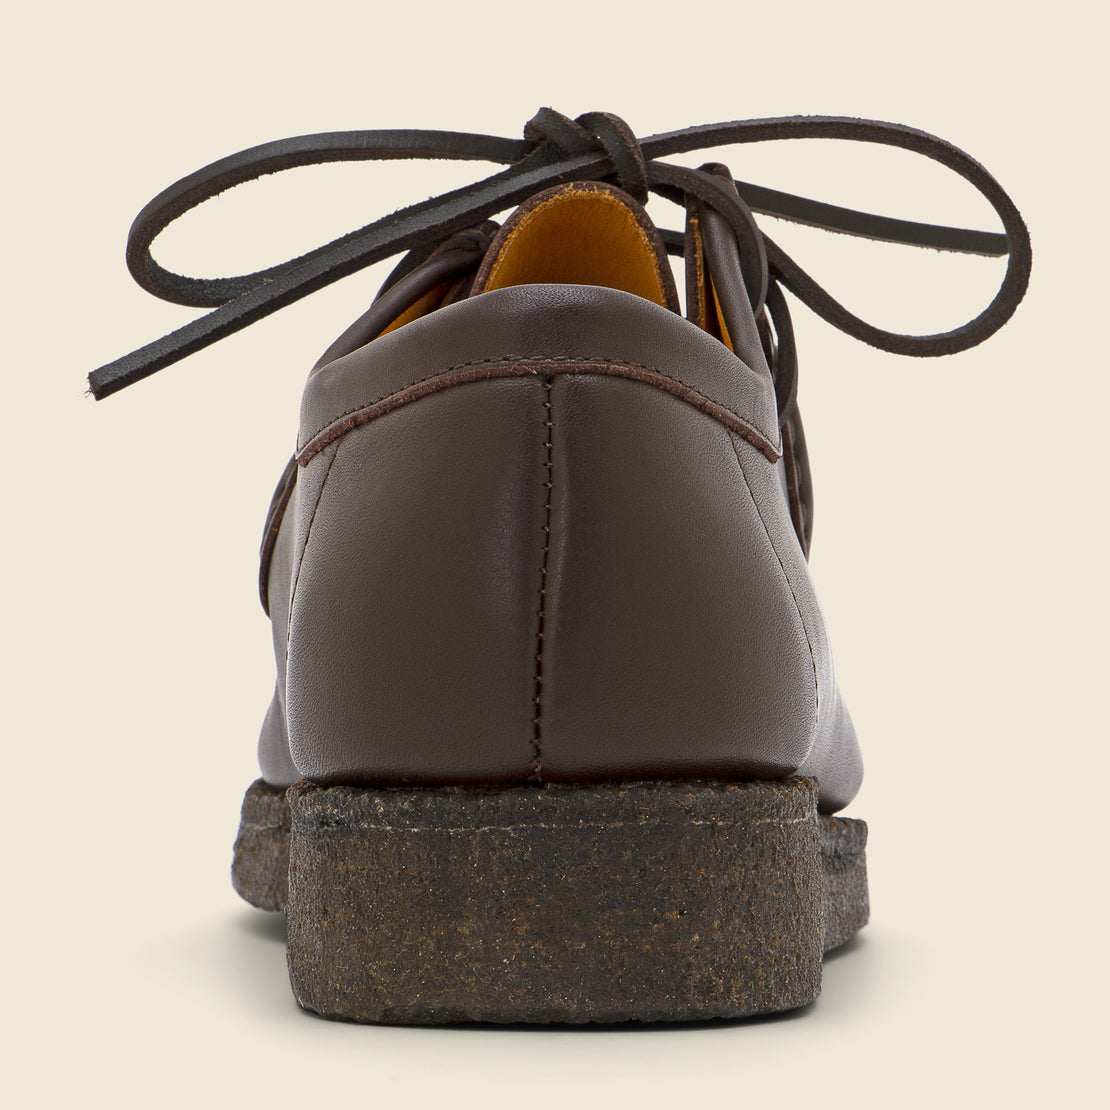 Type 1 Moccasin - Vaqueta Brown - Yuketen - STAG Provisions - Shoes - Boots / Chukkas